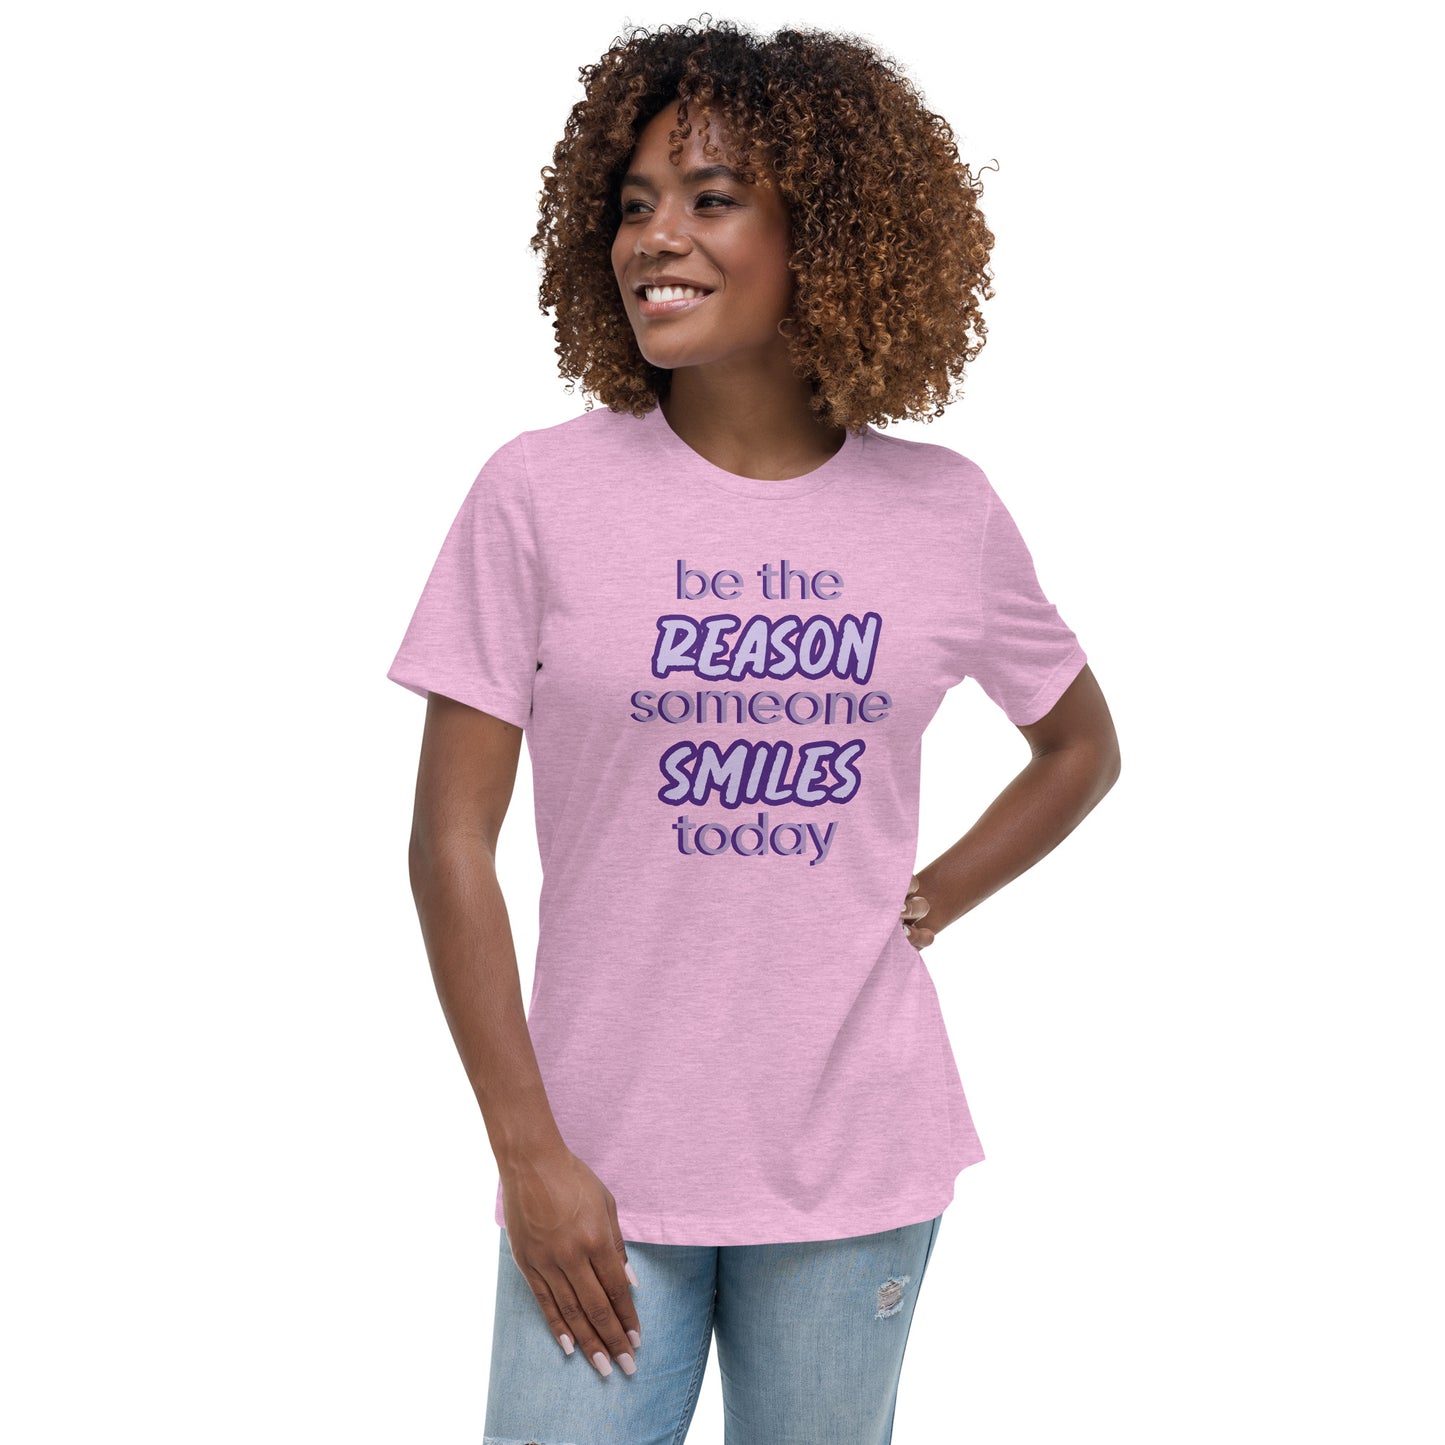 Woman with prism lilac T-shirt and the quote "be the reason someone smiles today" in purple on it. 